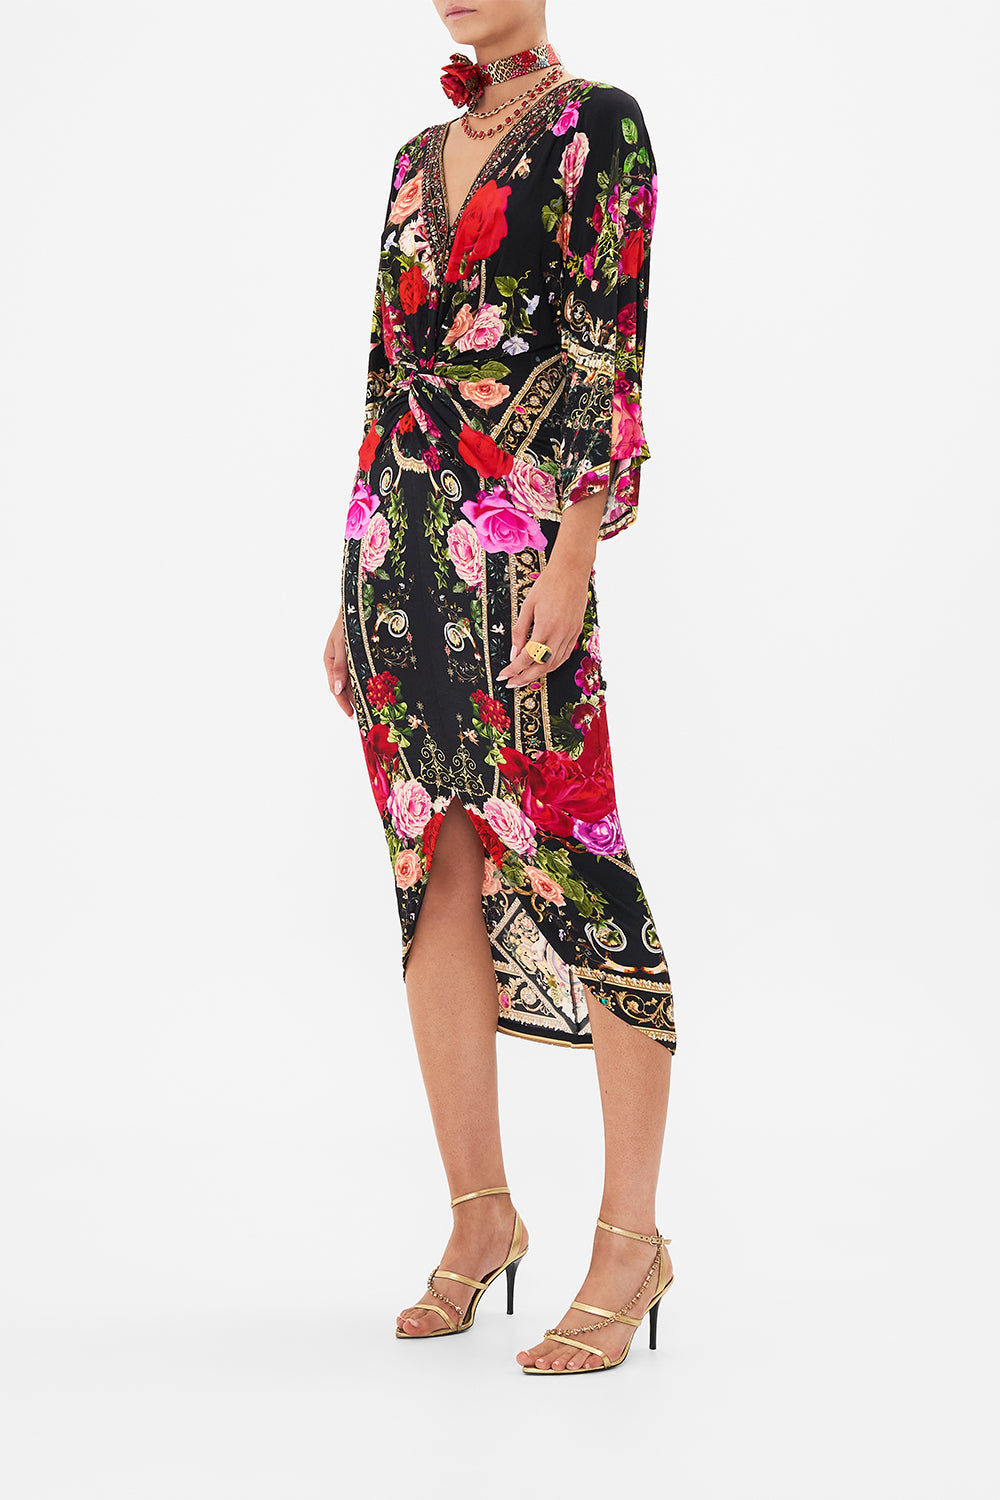 CAMILLA jersey dress in Reservation For Love print